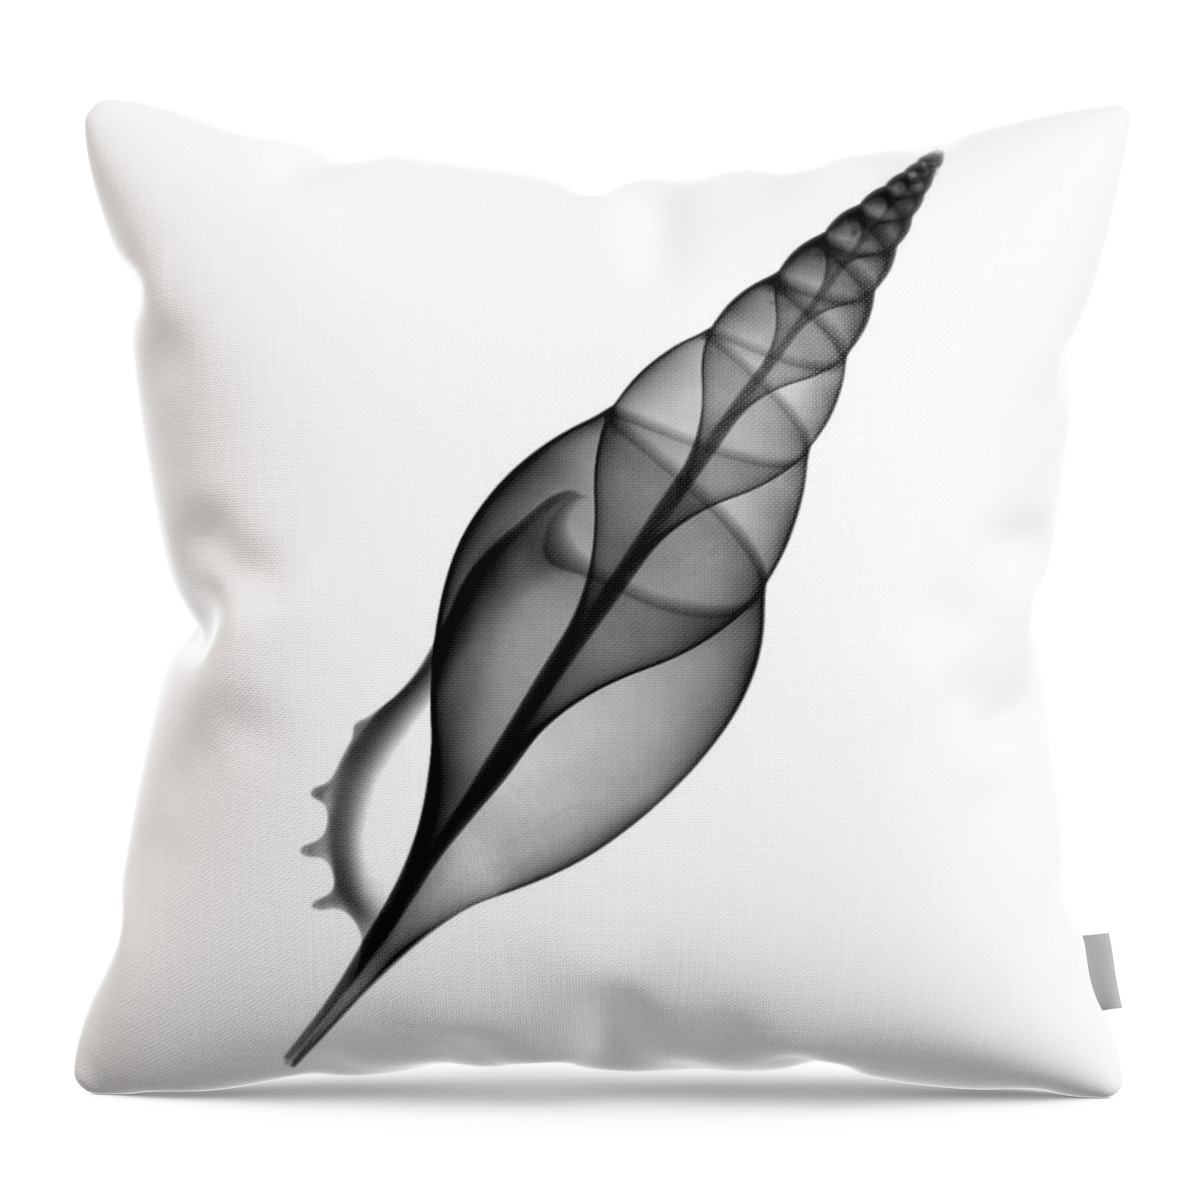 Radiograph Throw Pillow featuring the photograph X-ray Of Tibia Shell by Bert Myers